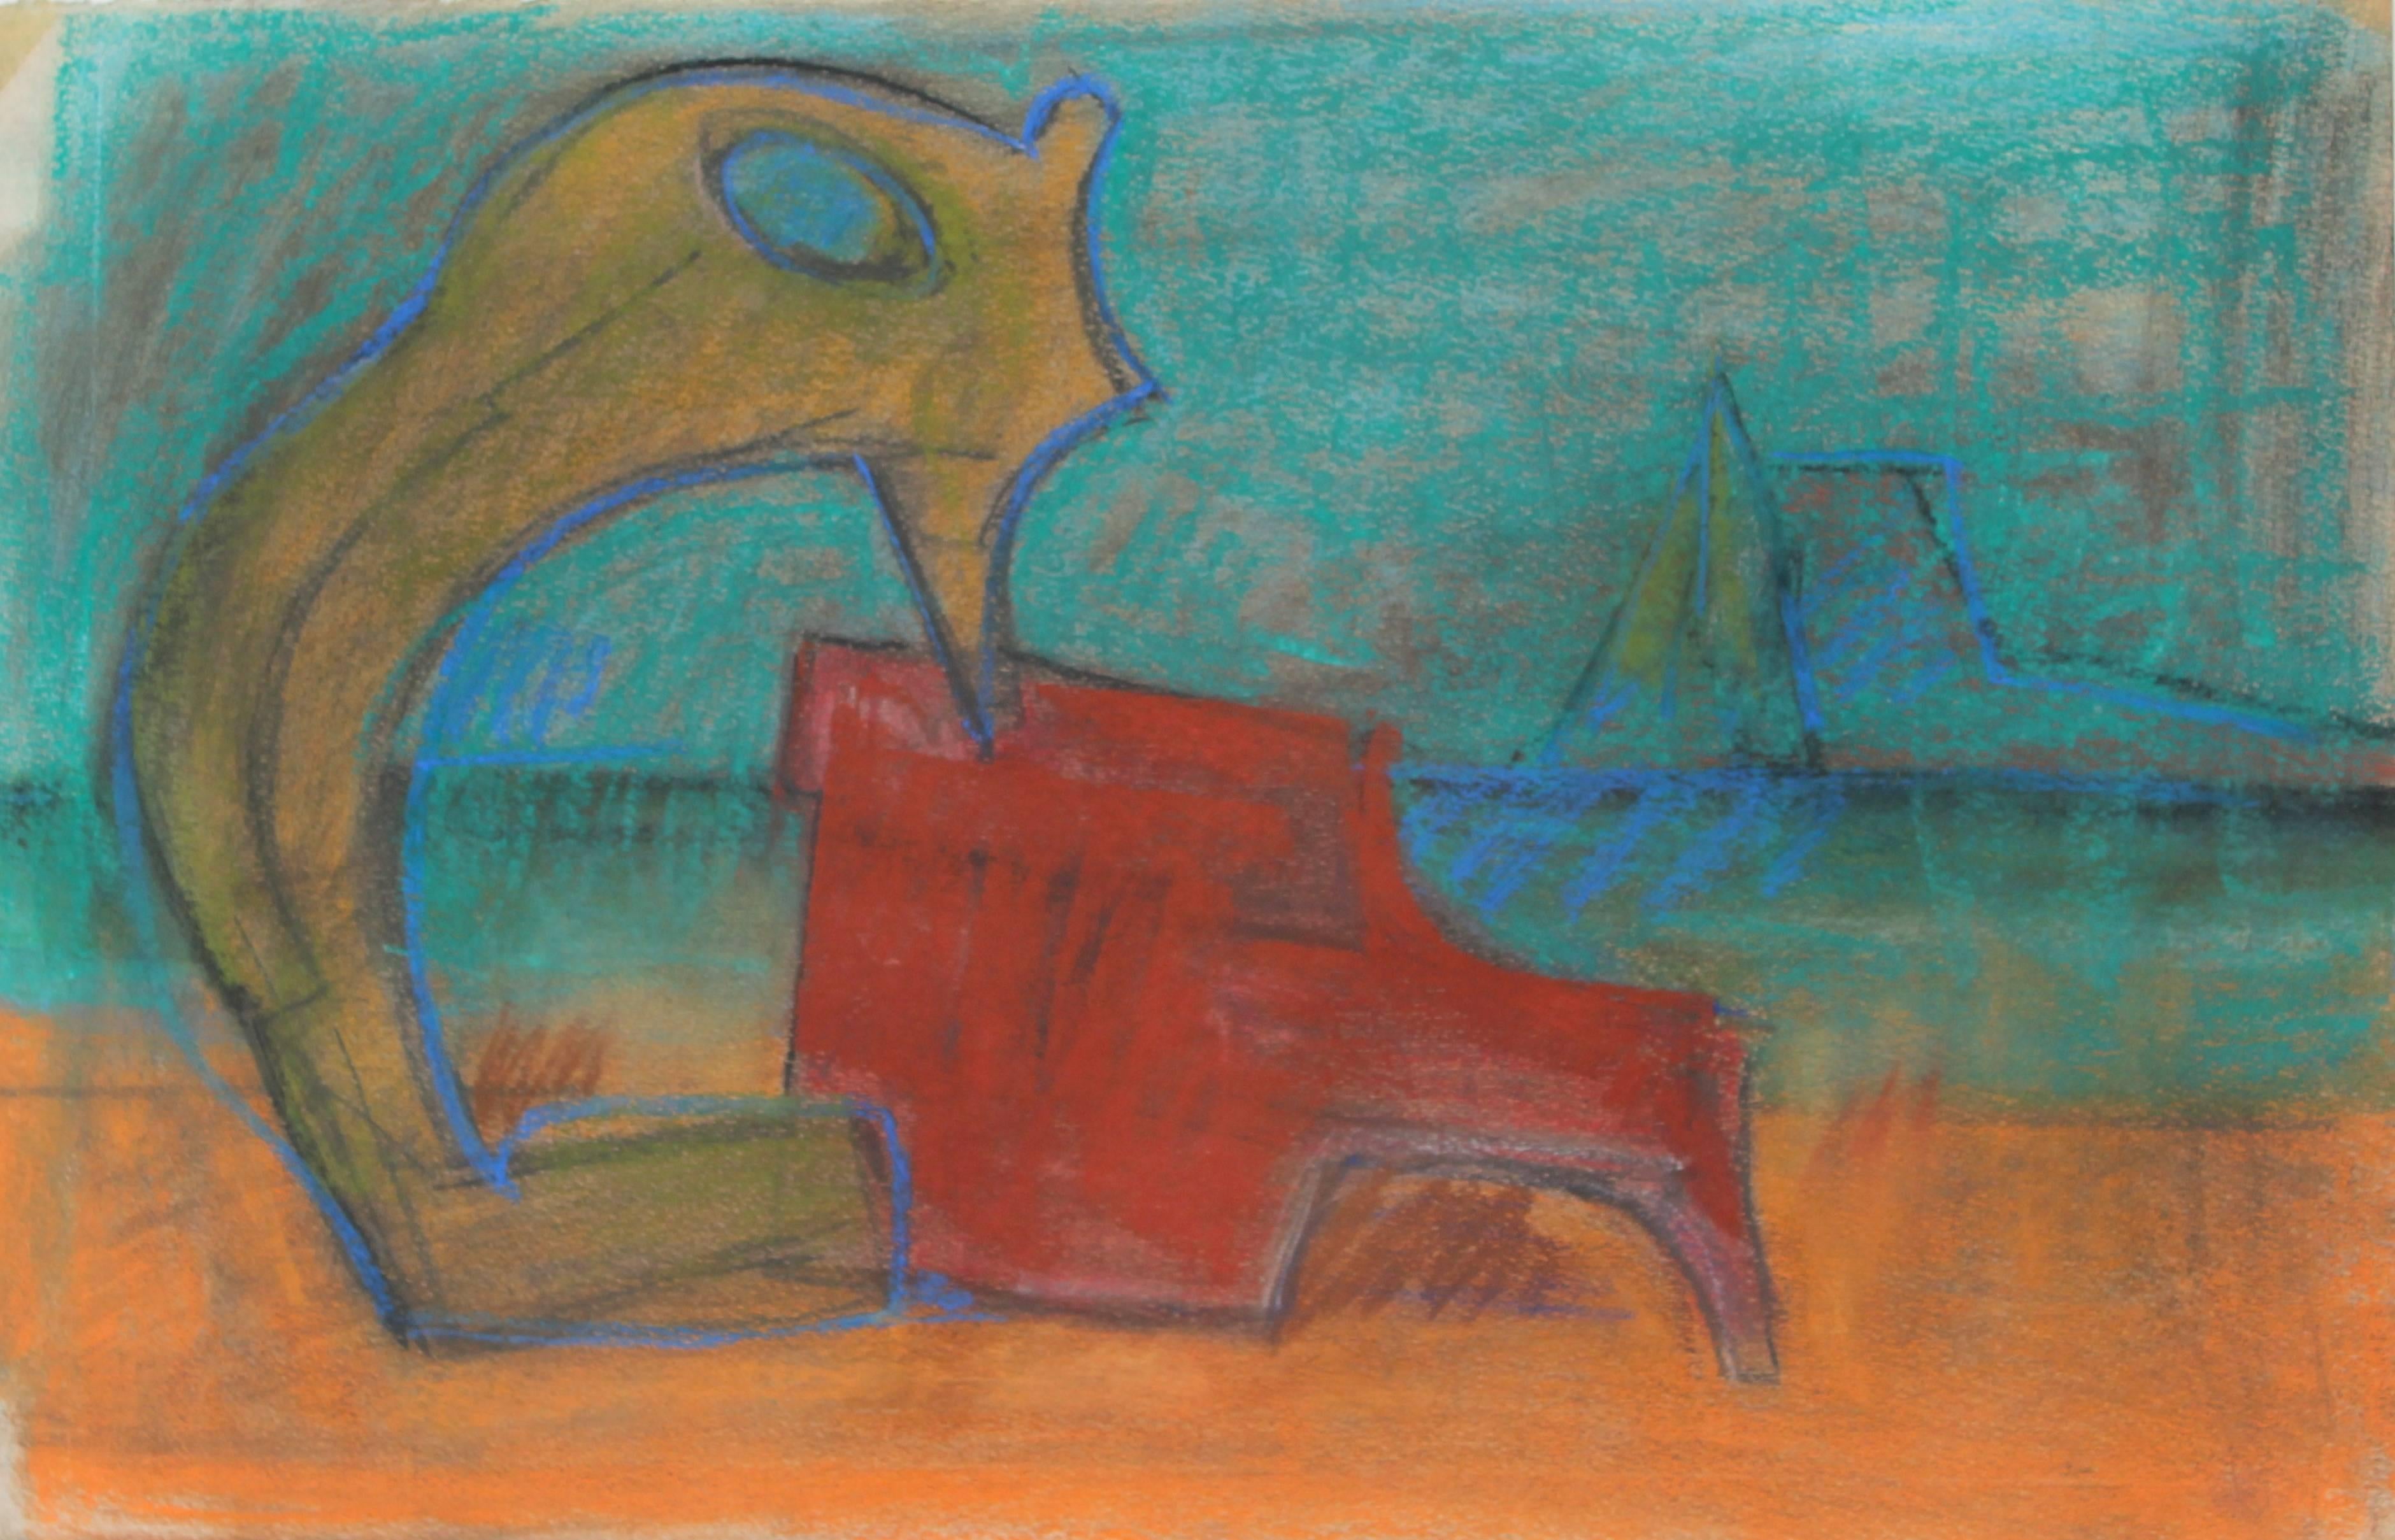 Dave Fox Abstract Drawing - Modernist Abstract in Pastel, 1960s